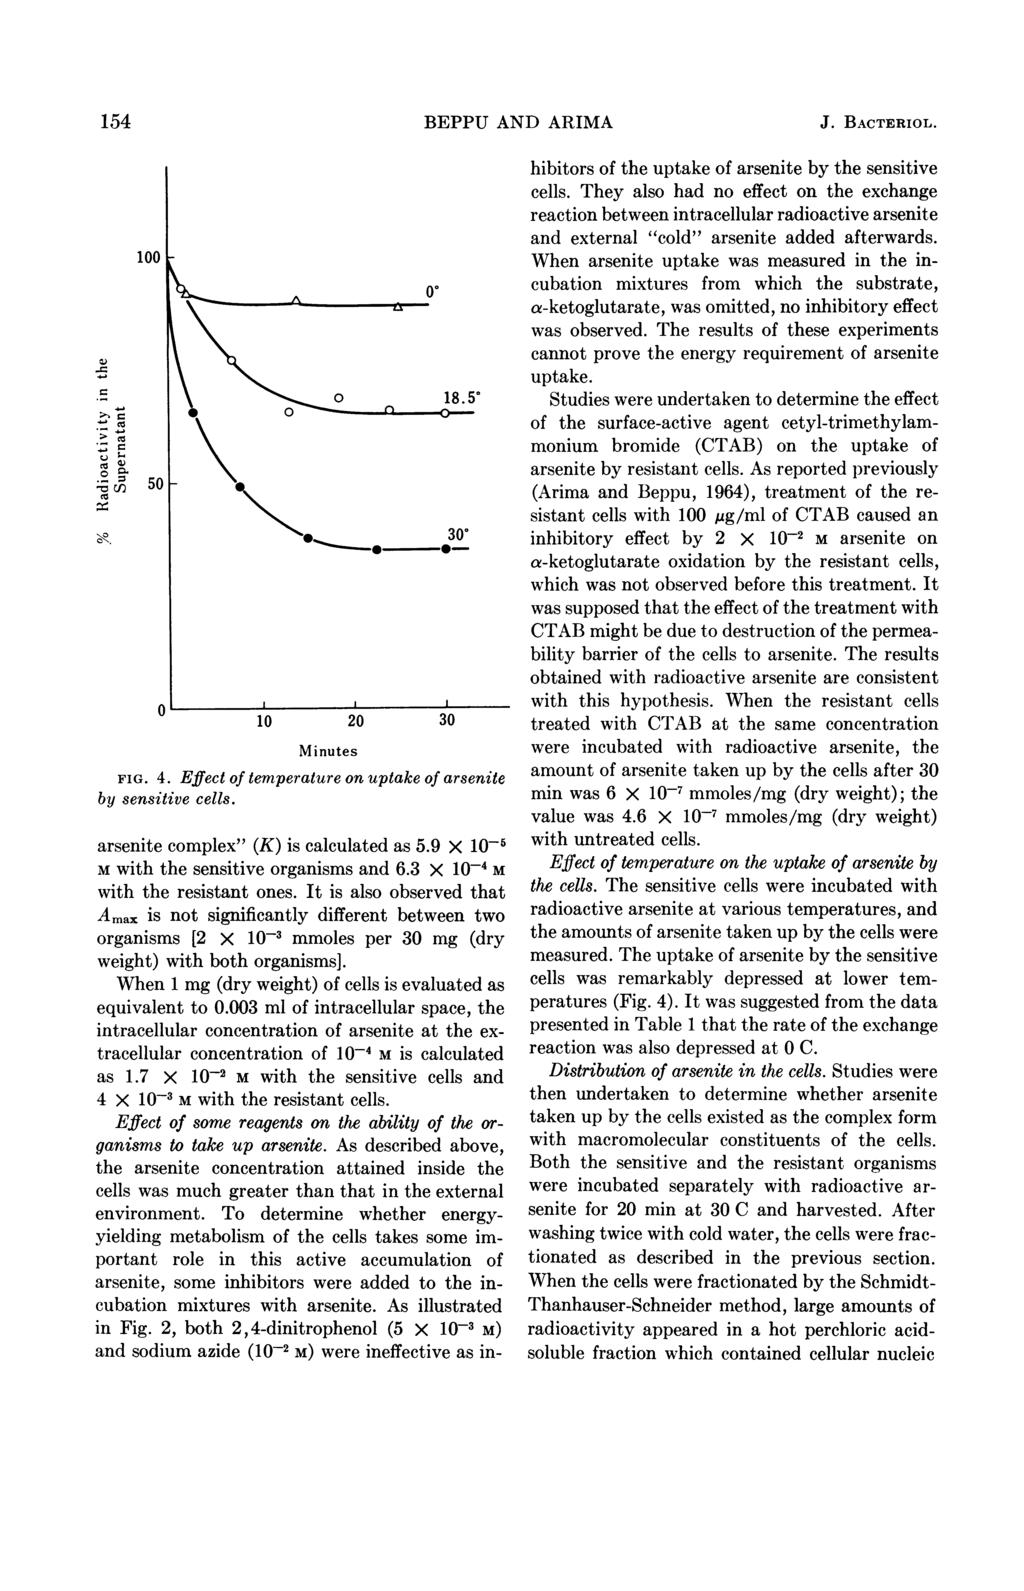 154 BEPPU AND ARIMA J. BACTERIOL.._ c.1 *- o-c/ cts u - o 0- r z co, 100 -V 10 20 30 Minutes FIG. 4. Effect of temperature on uptake of arsenite by sensitive cells.